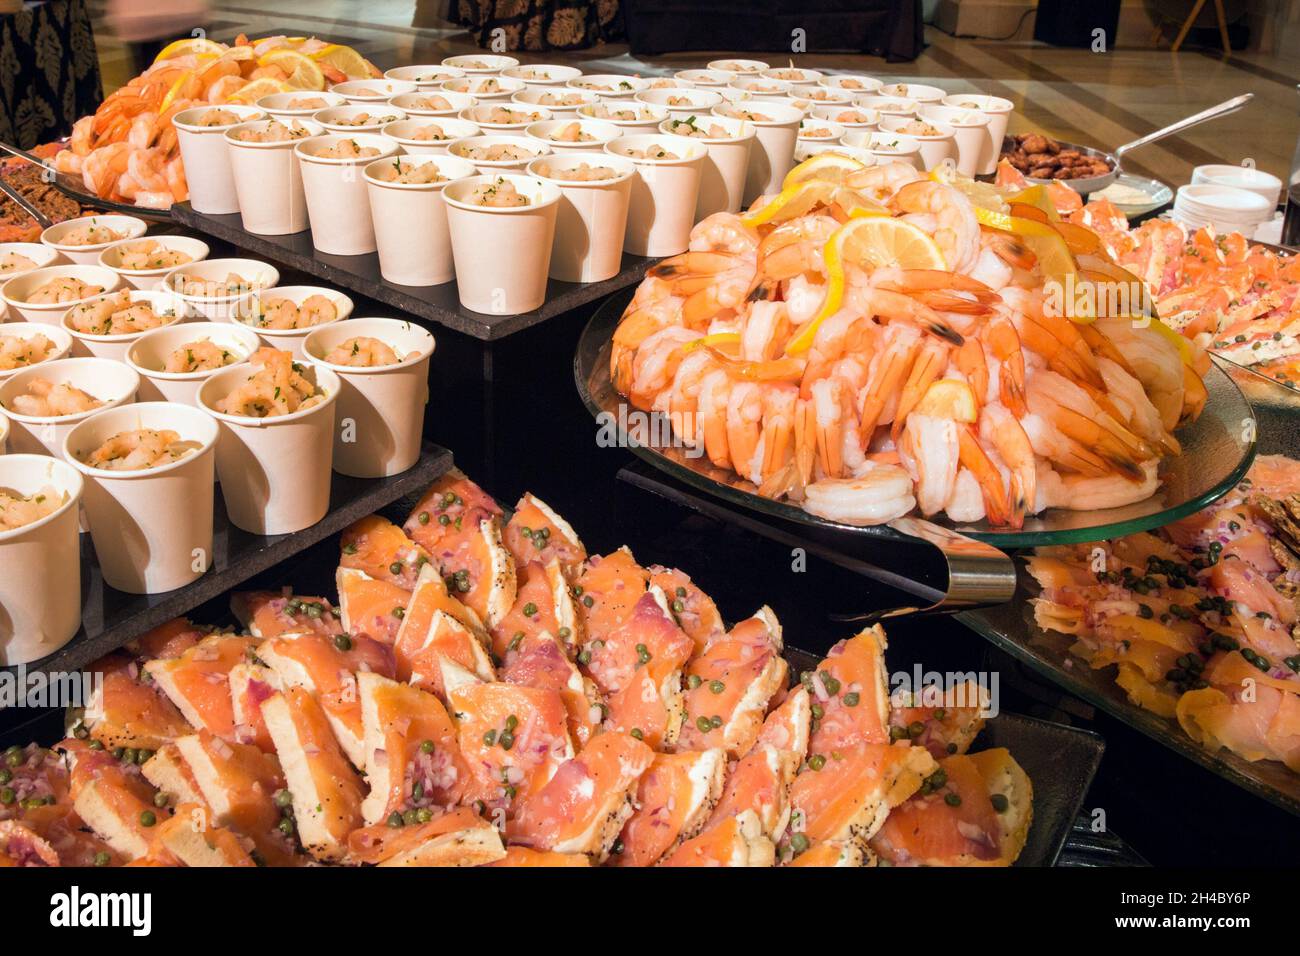 Seafood buffet is set up at an event. Stock Photo